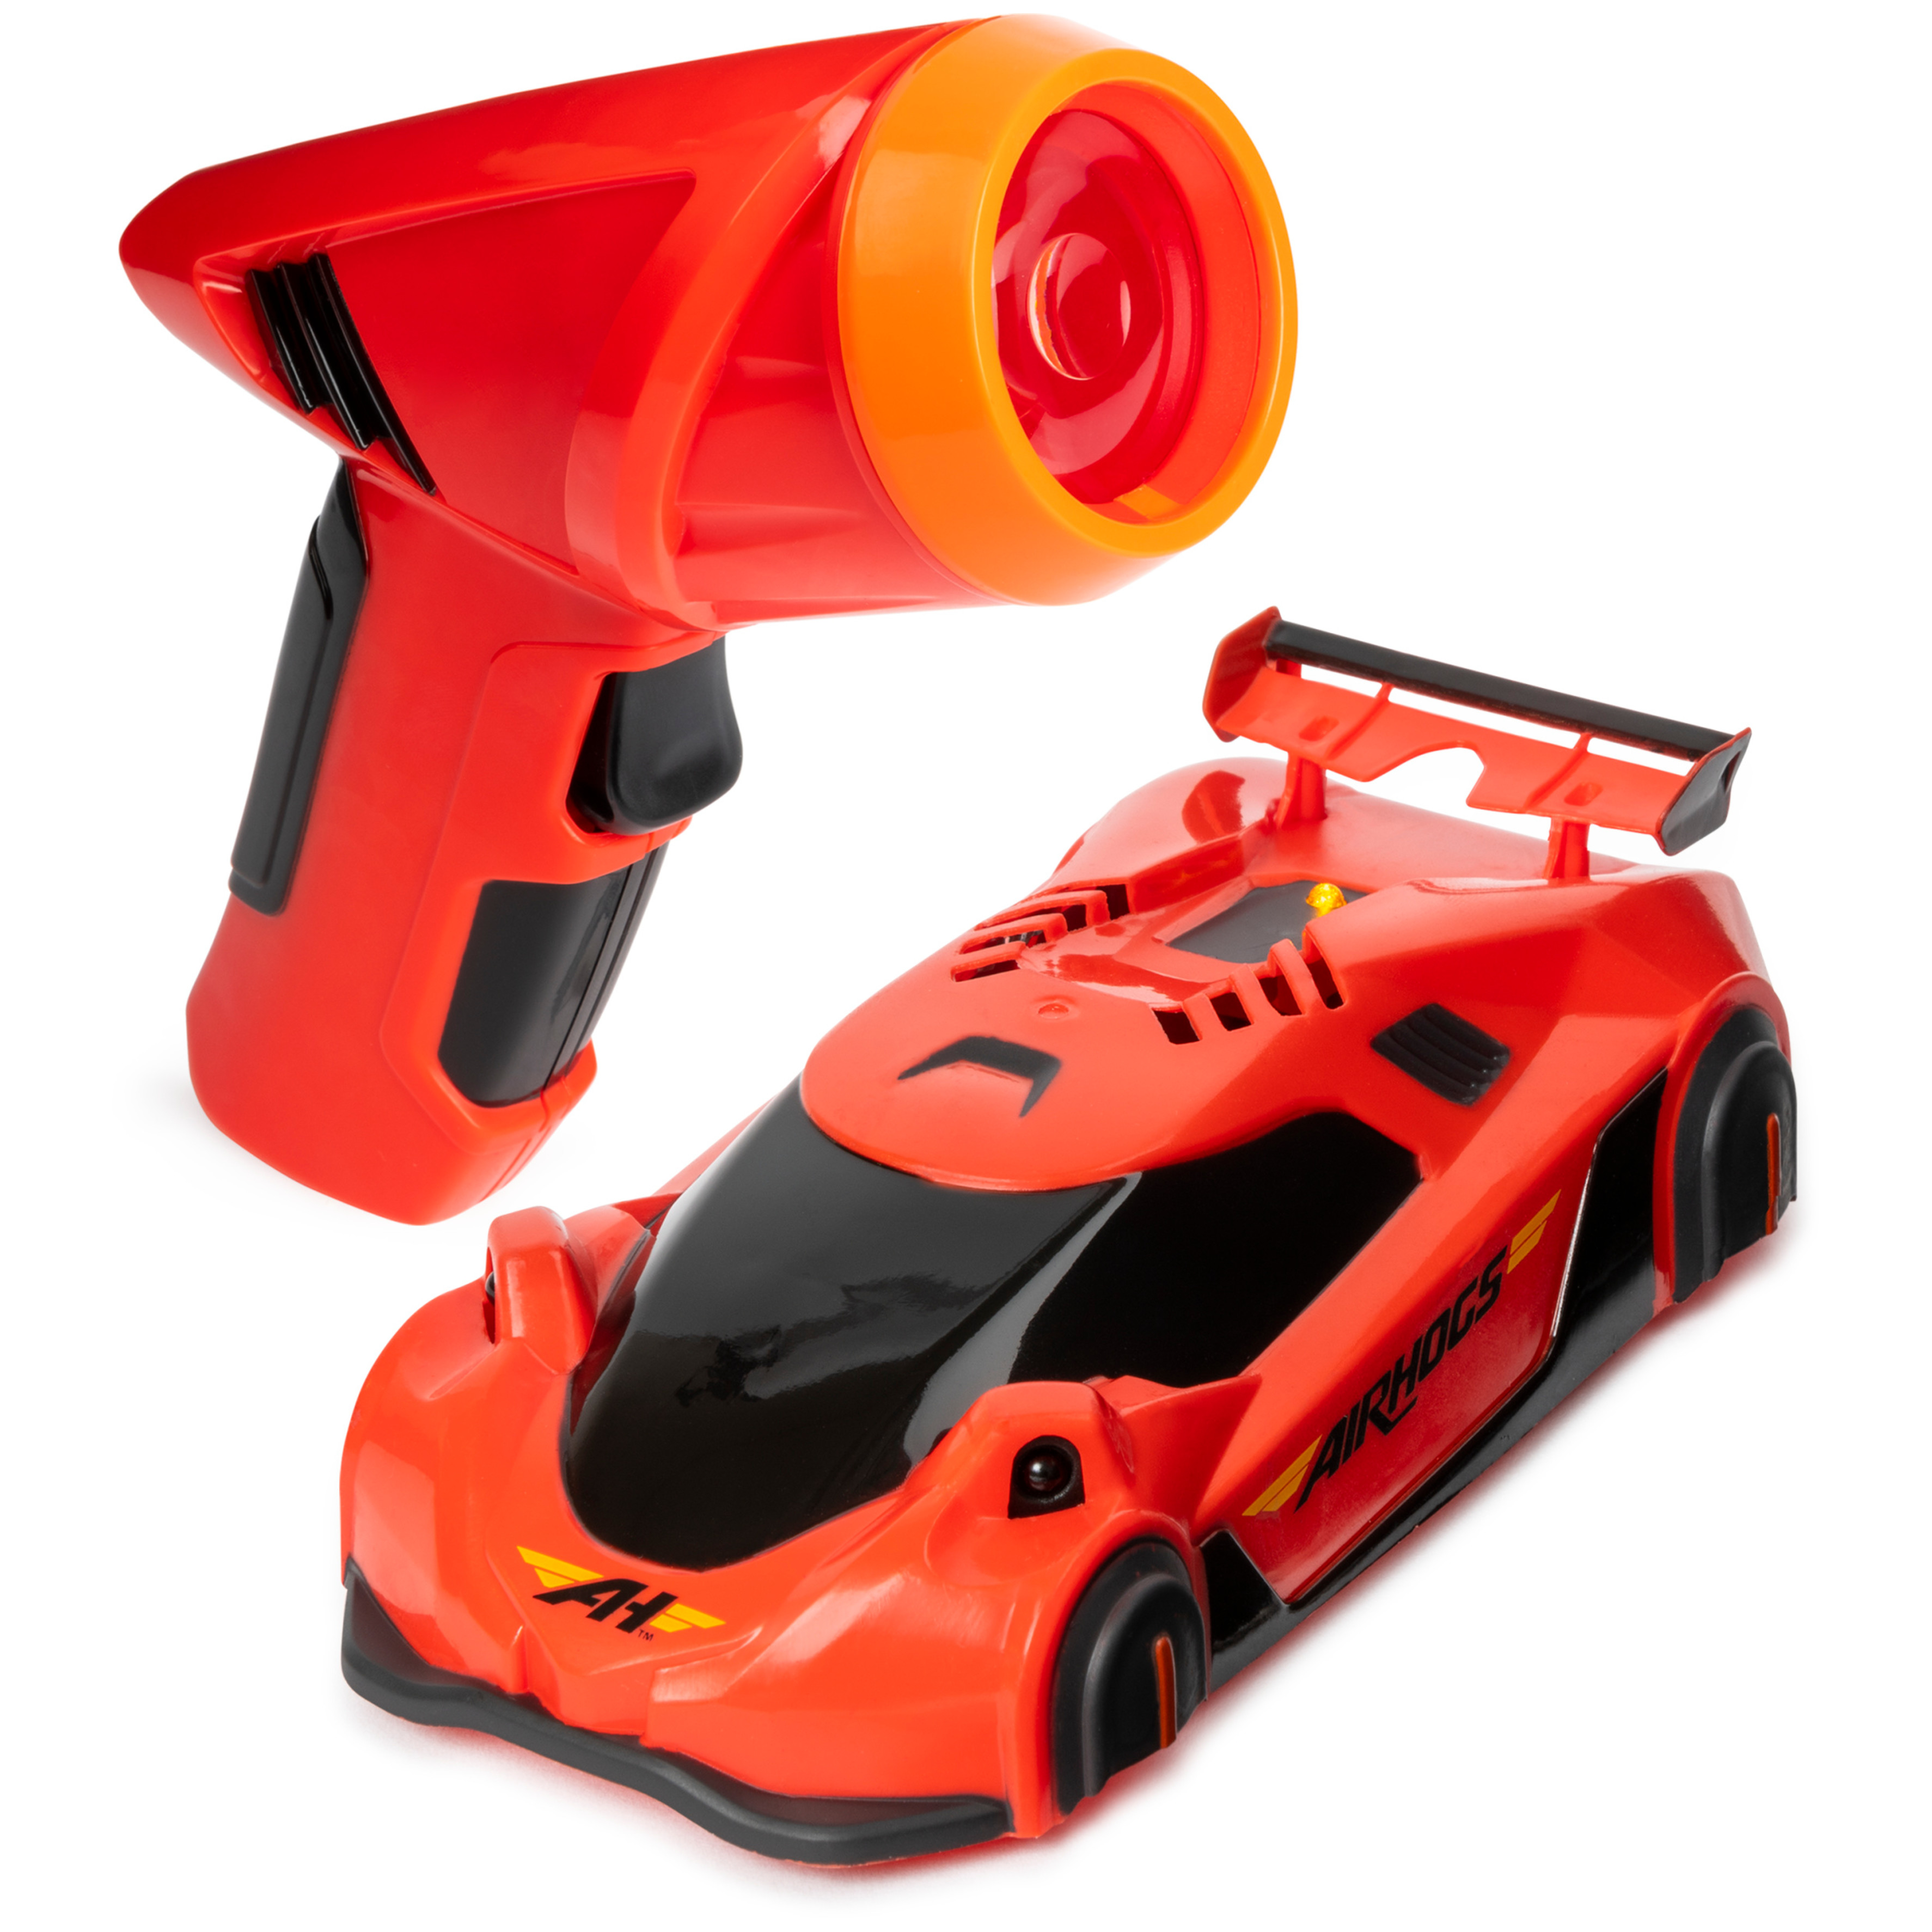 Air Hogs, Zero Gravity Laser, Laser-Guided Wall Racer, Wall Climbing Race Car, Red - image 1 of 8